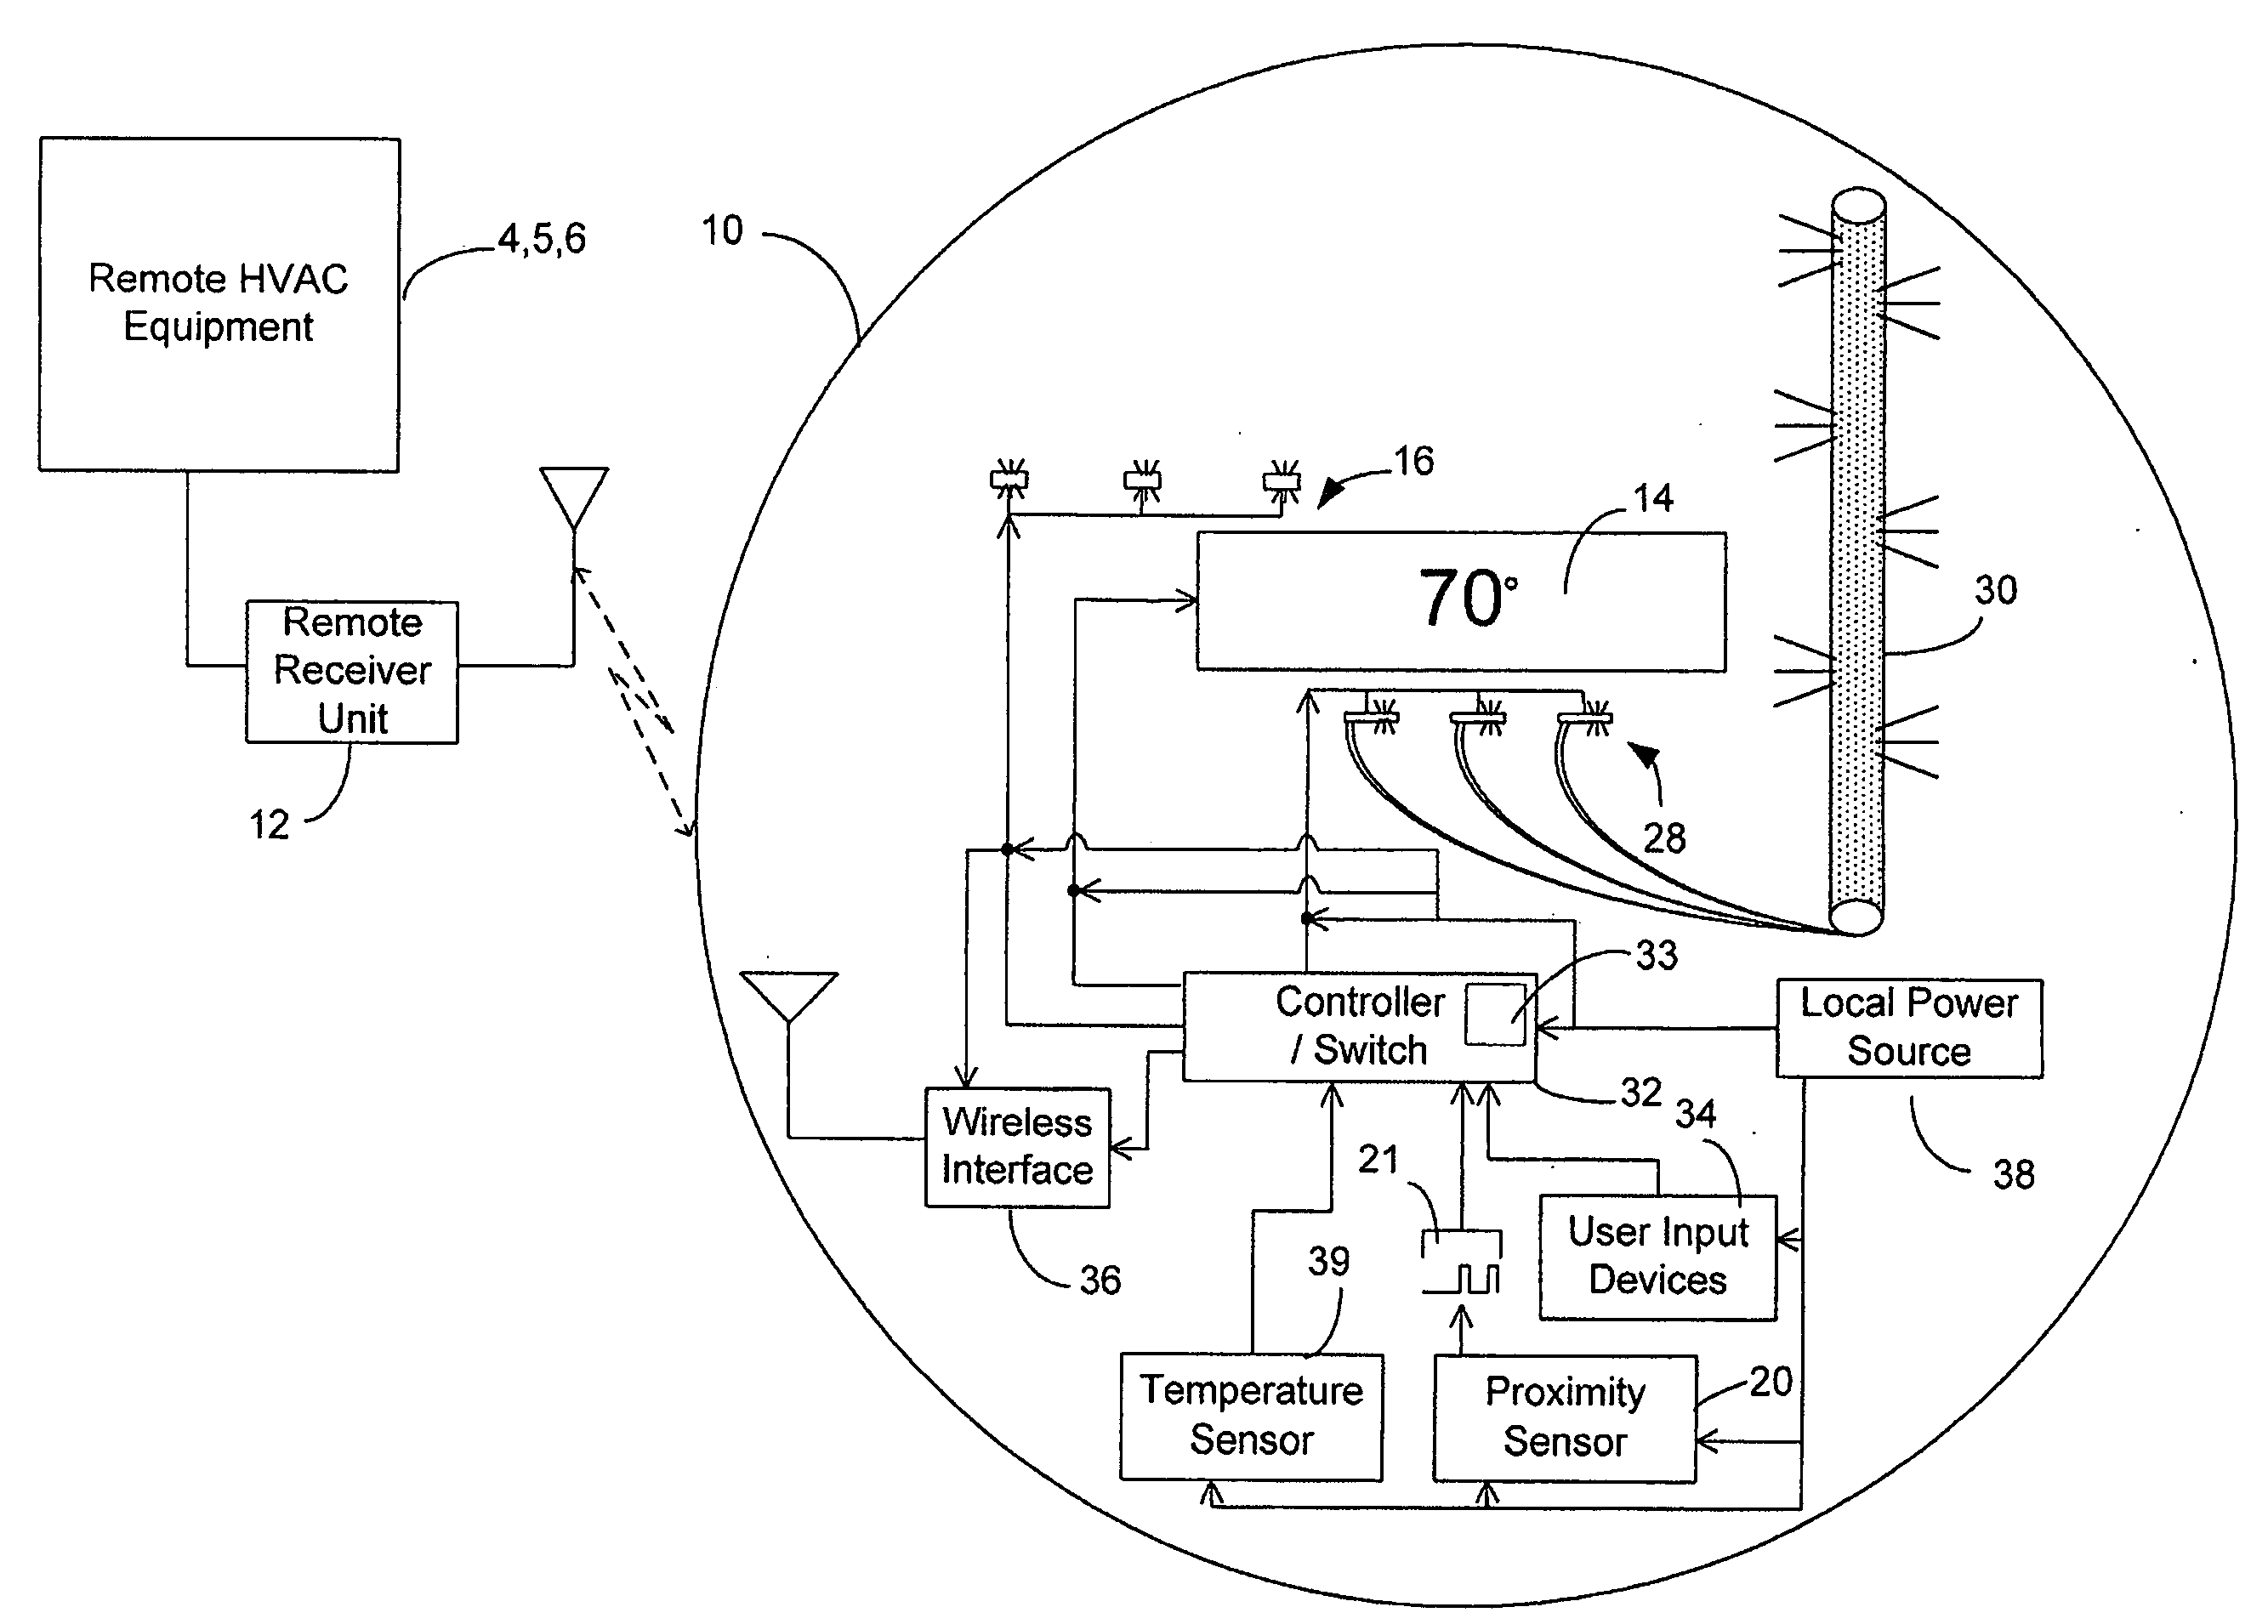 Management of a thermostat's power consumption